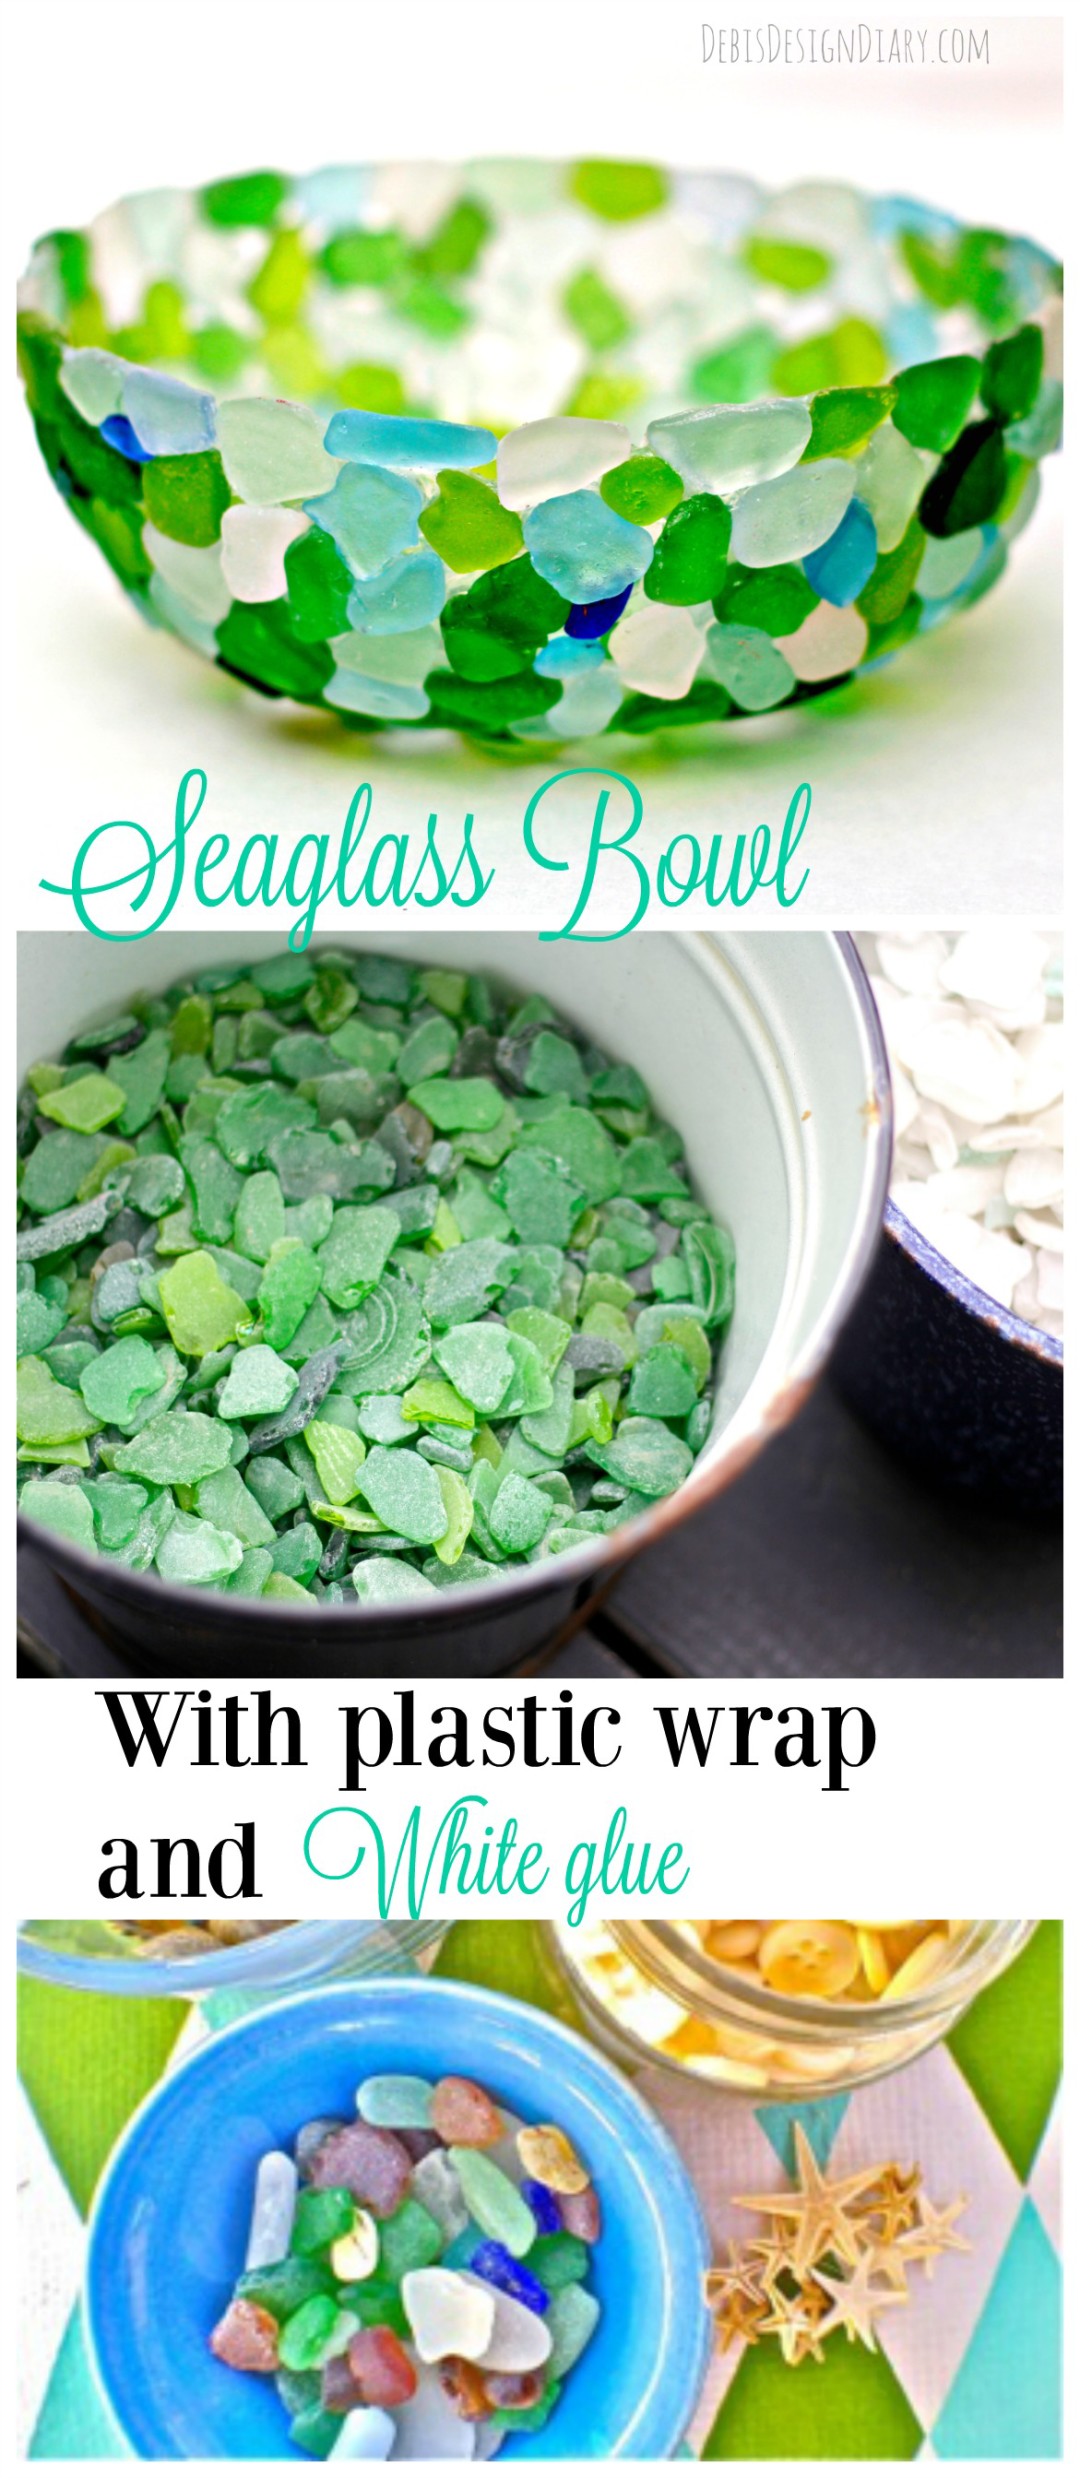 How To Make A Sea Glass Bowl With Plastic Wrap And White Glue Debis Design Diary